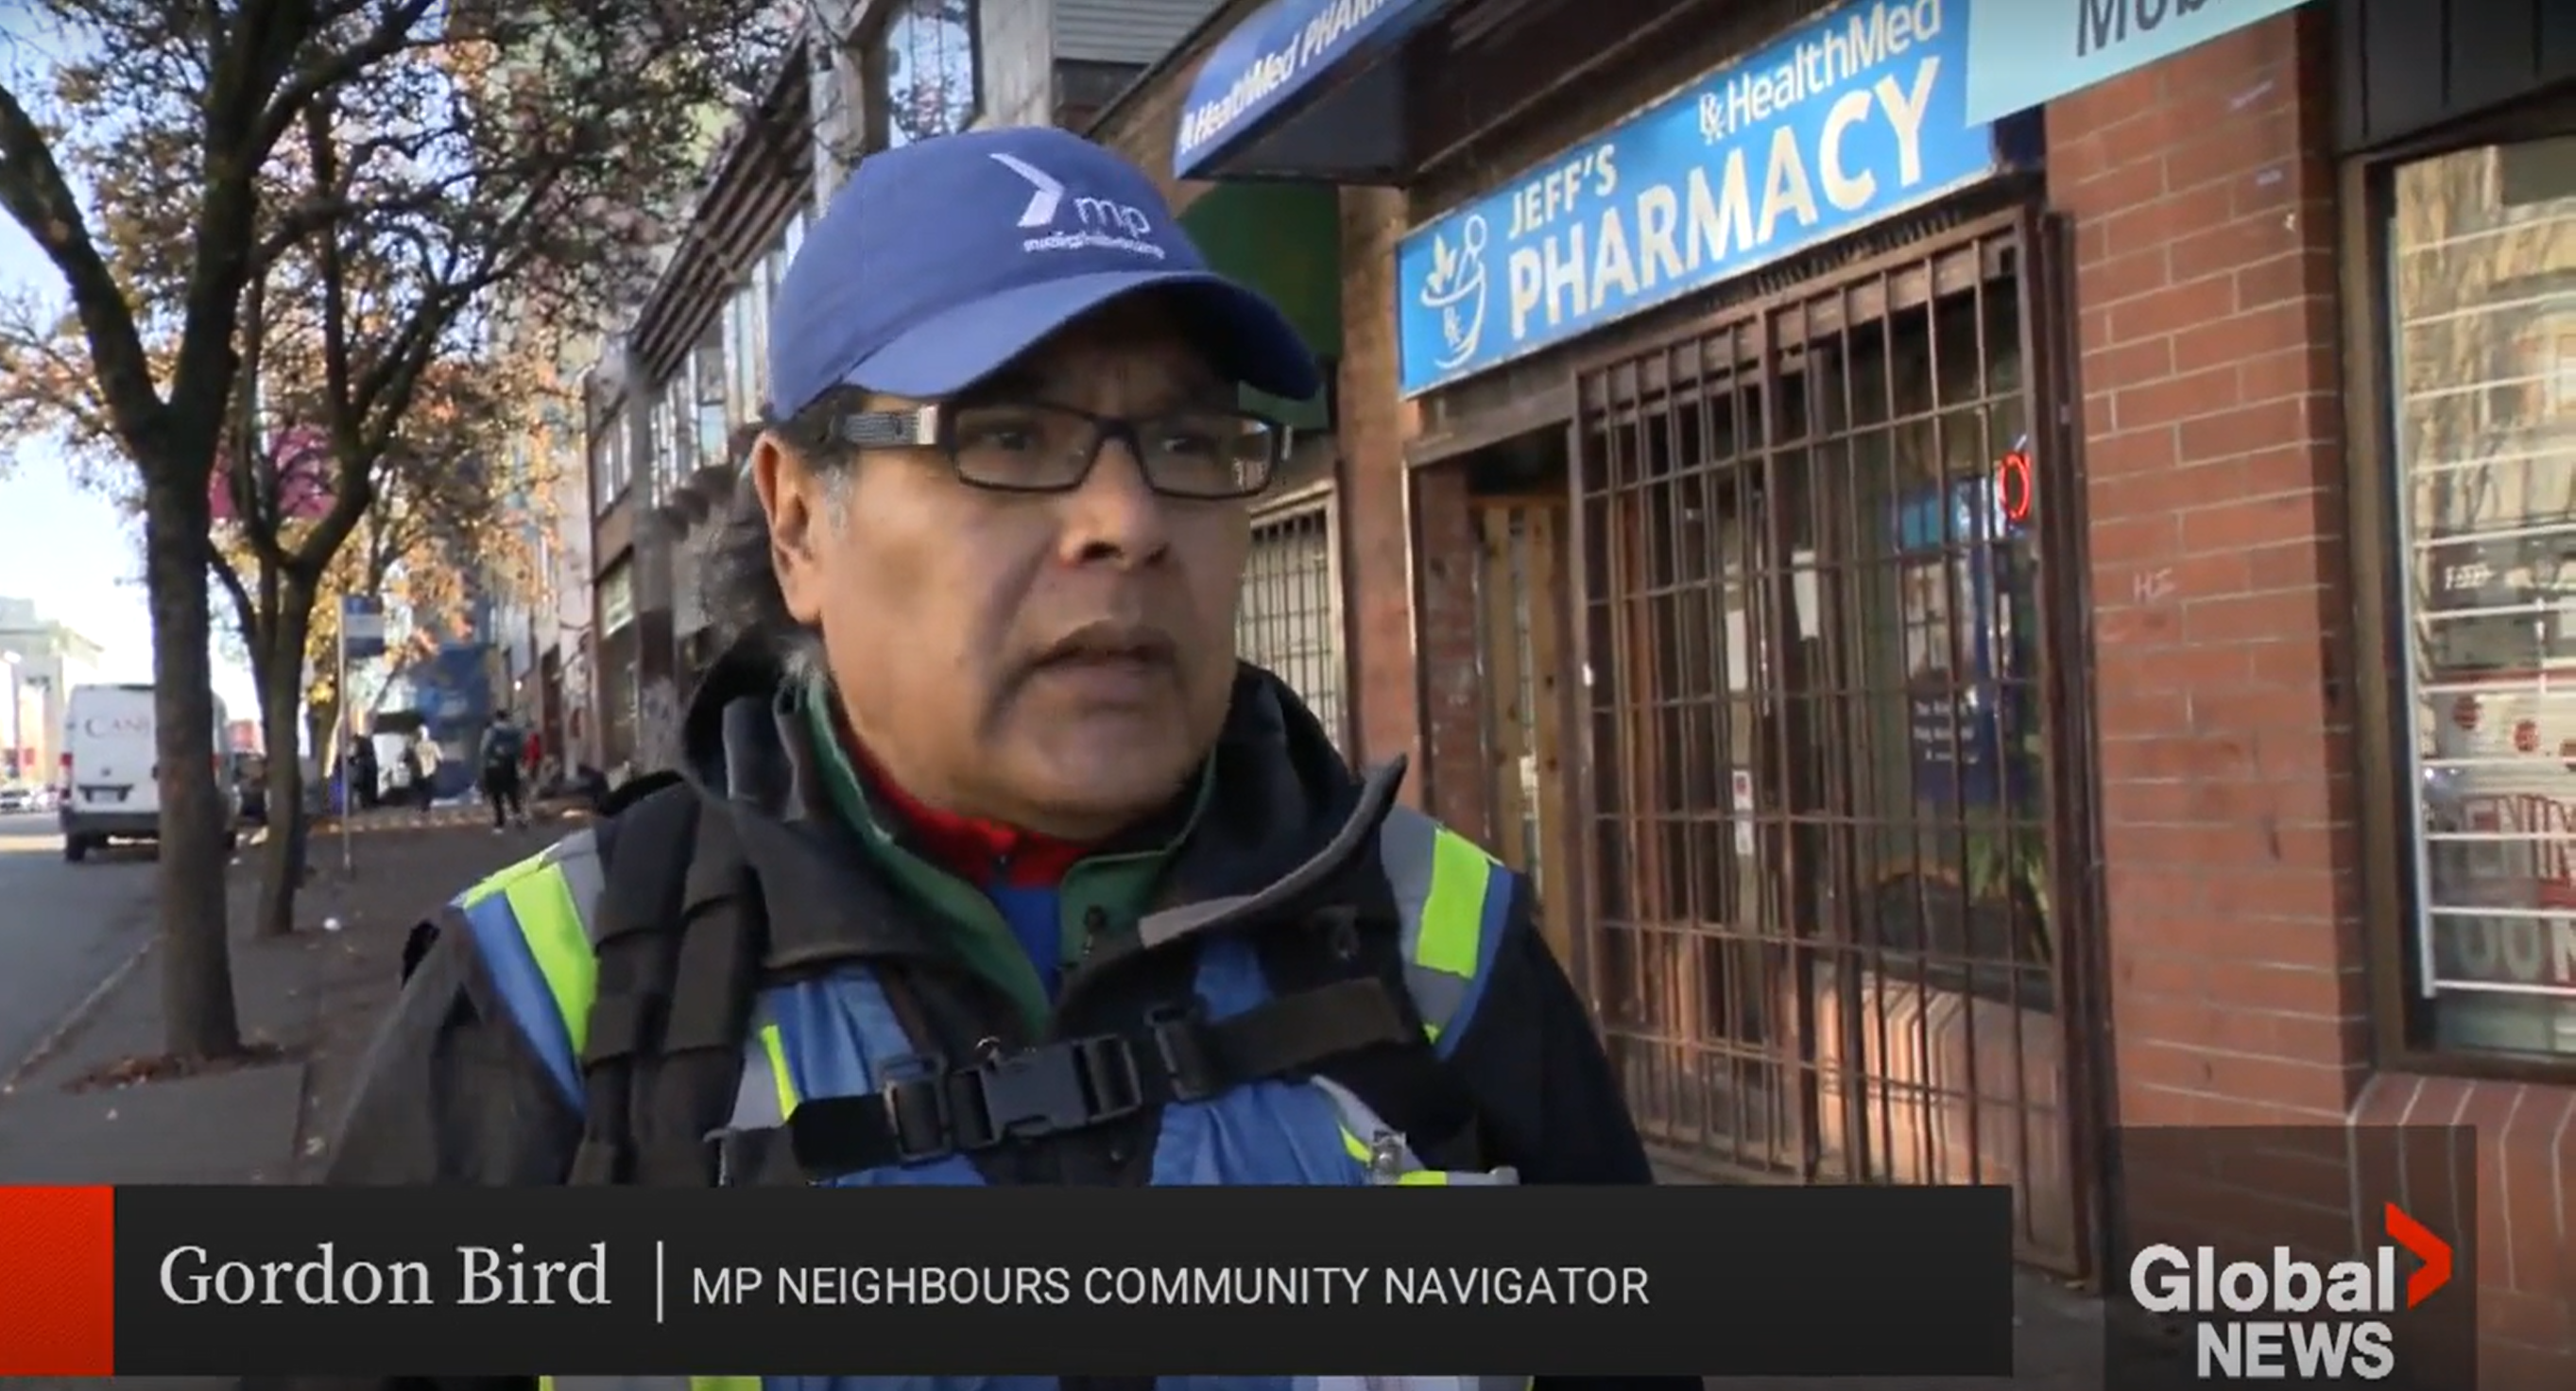 Mission Possible Peer-based program takes alternative approach to security in Vancouver’s DTES